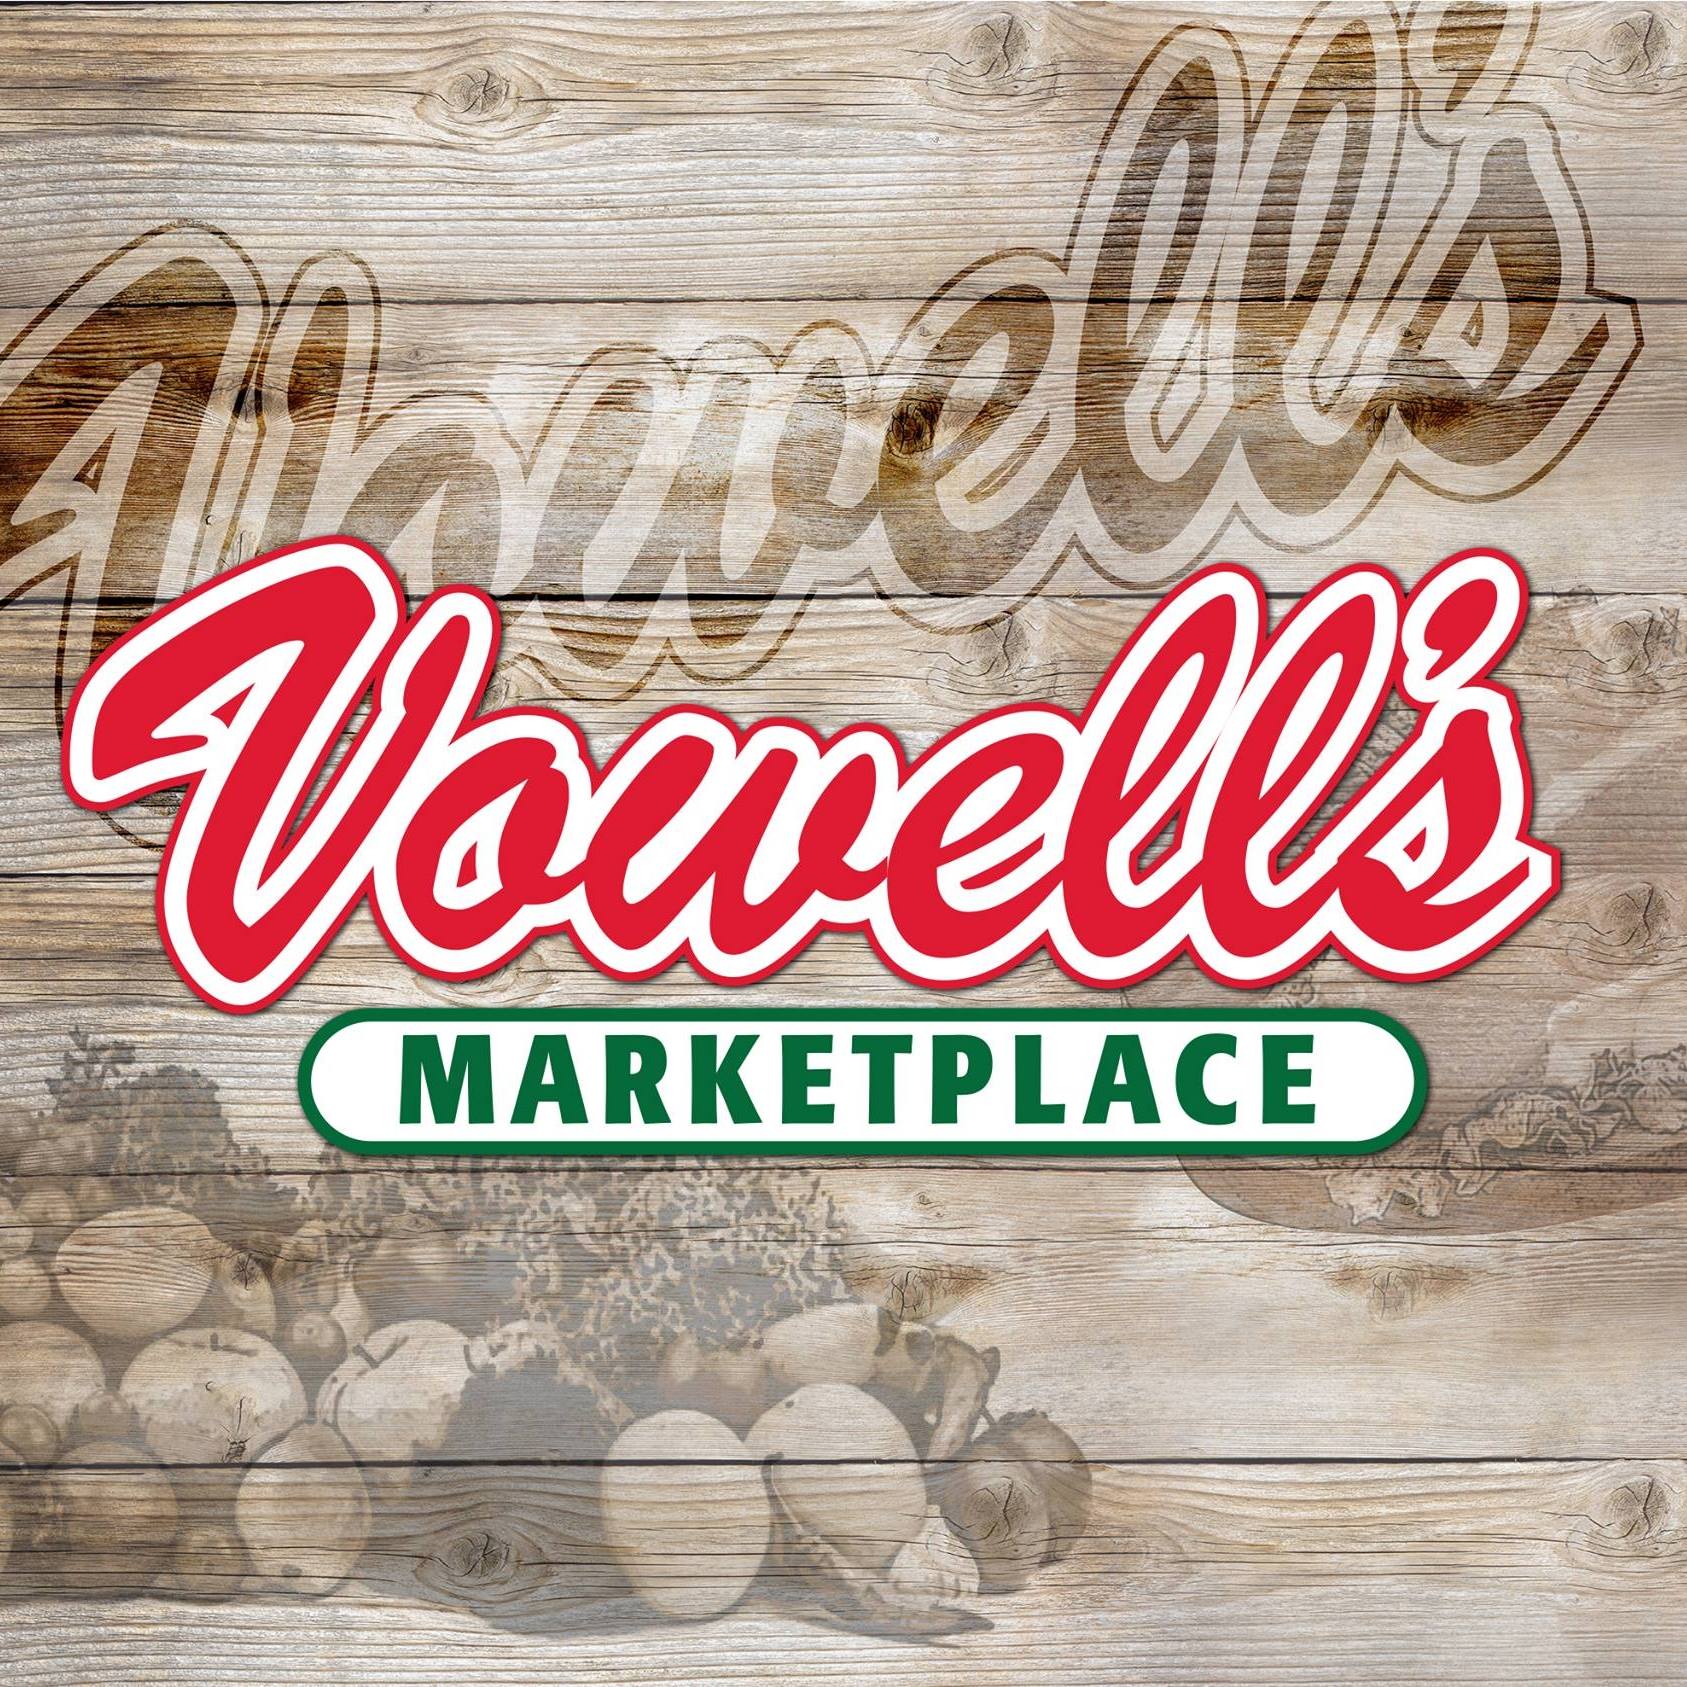 Vowell's Marketplace